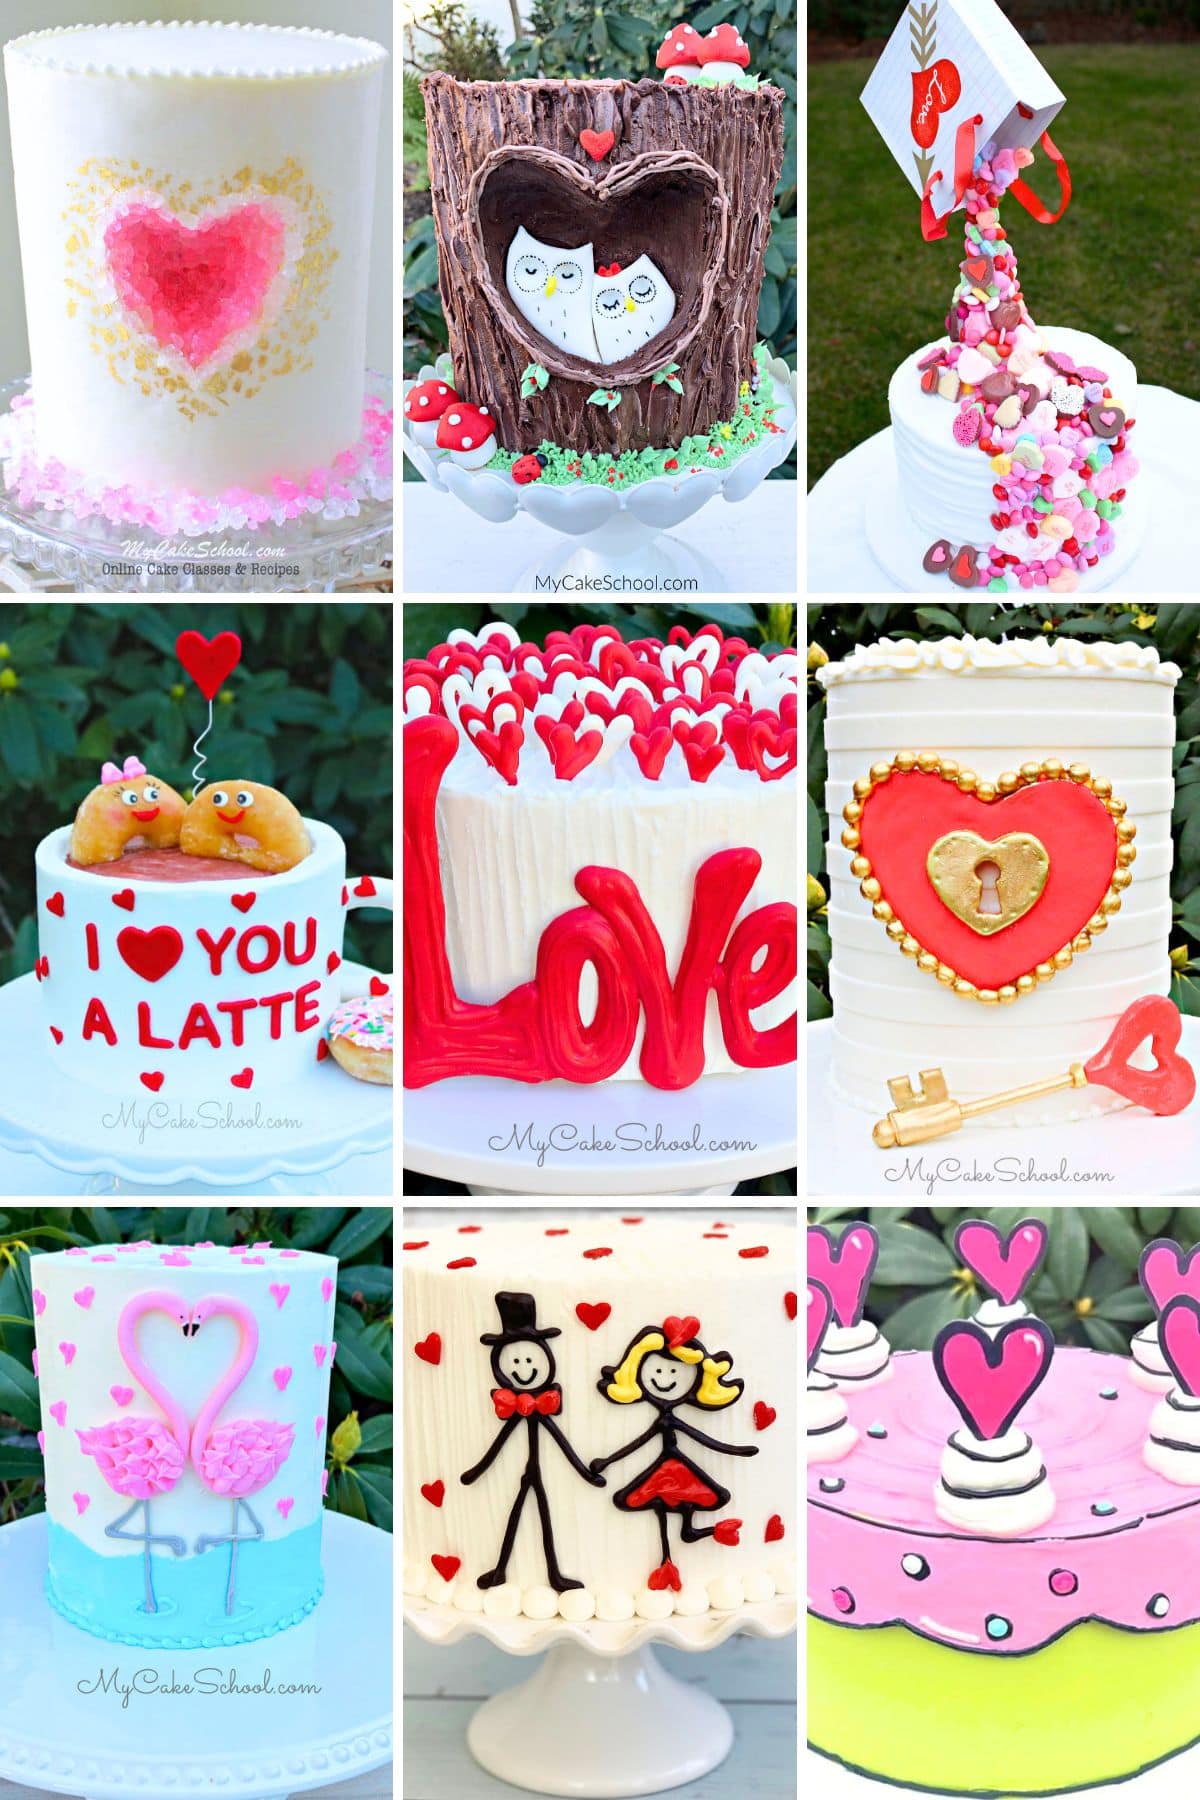 Photo grid of favorite Valentine's Day cake designs from our free tutorials.